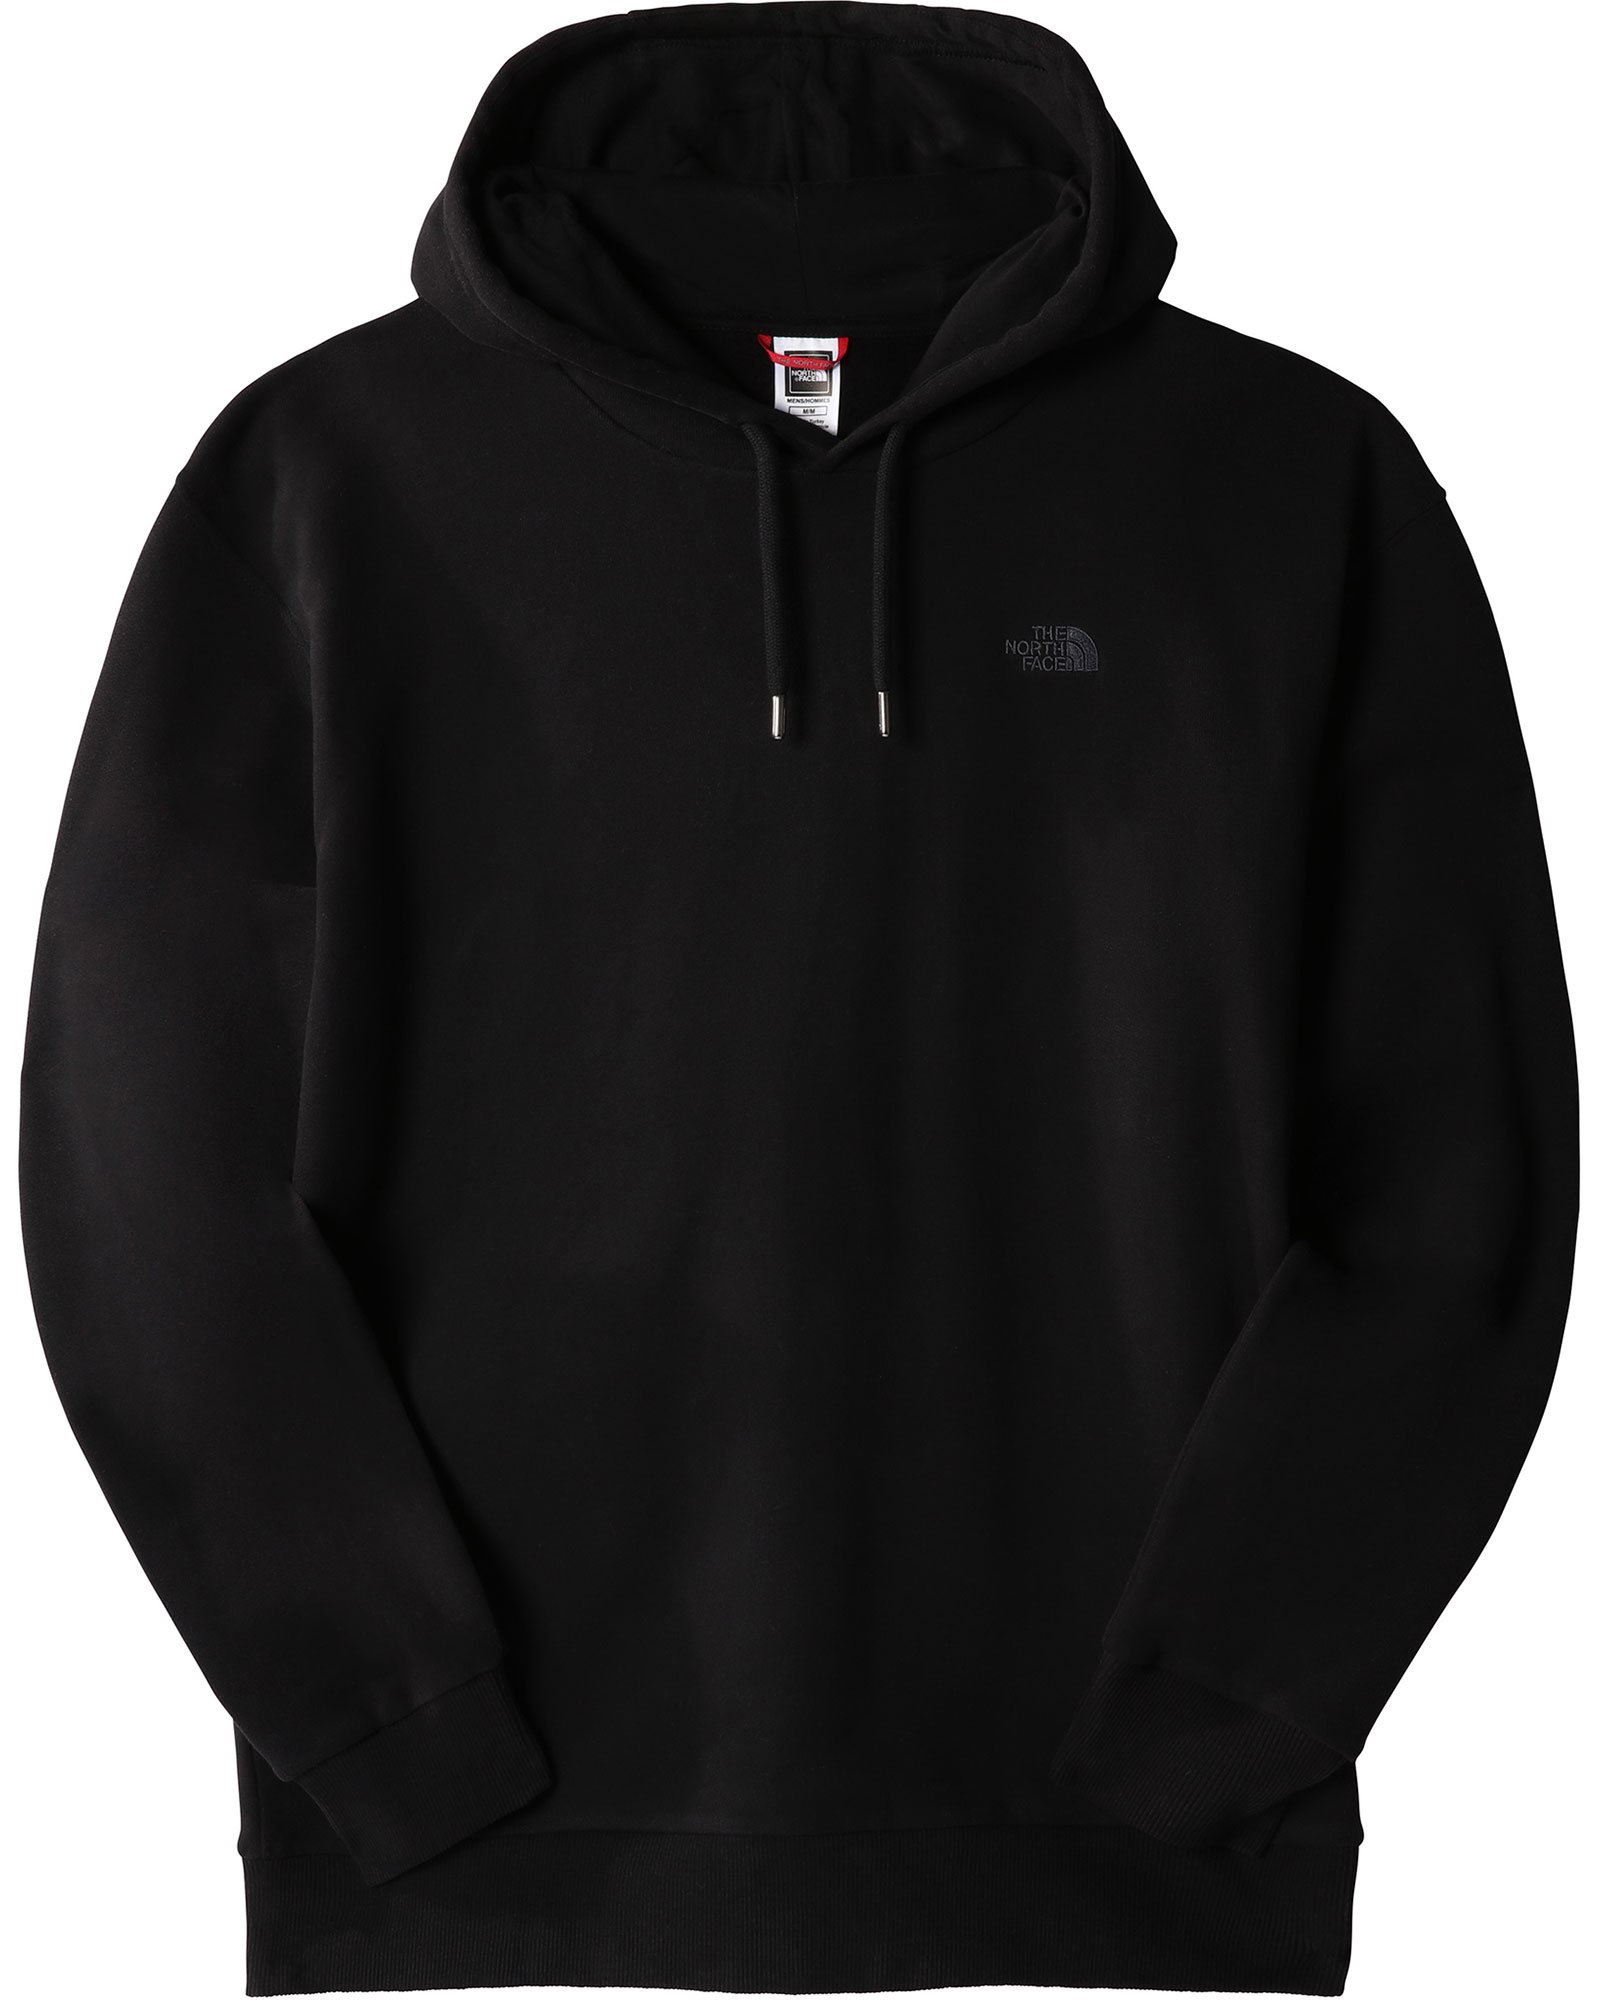 The North Face City Standard Mens Hoodie